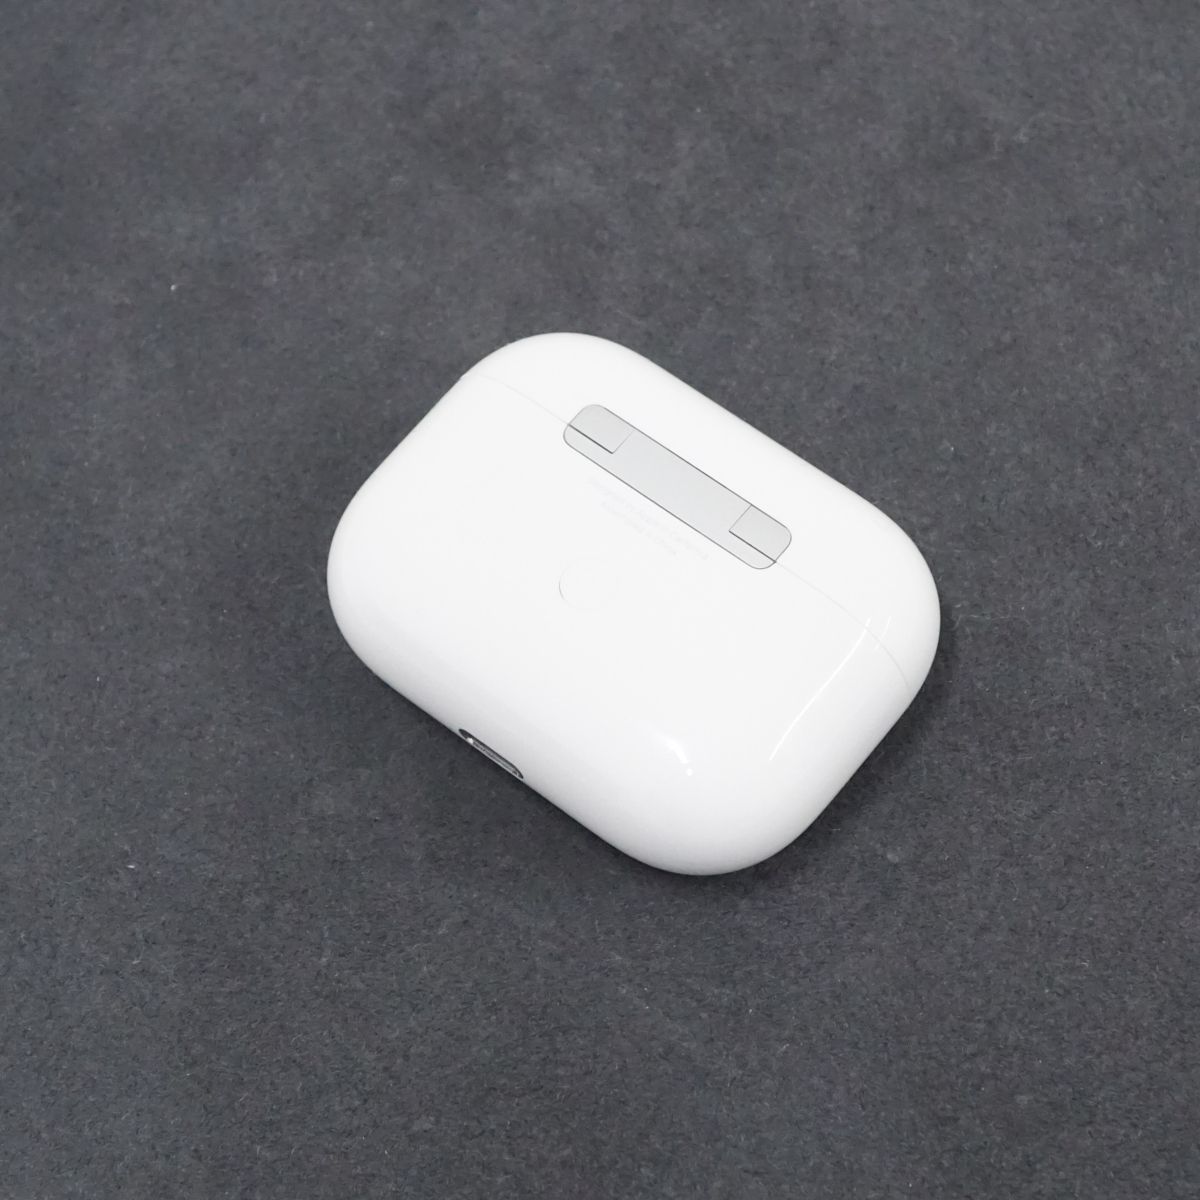 Apple AirPods Pro 充電ケース USED超美品 ワイヤレス充電